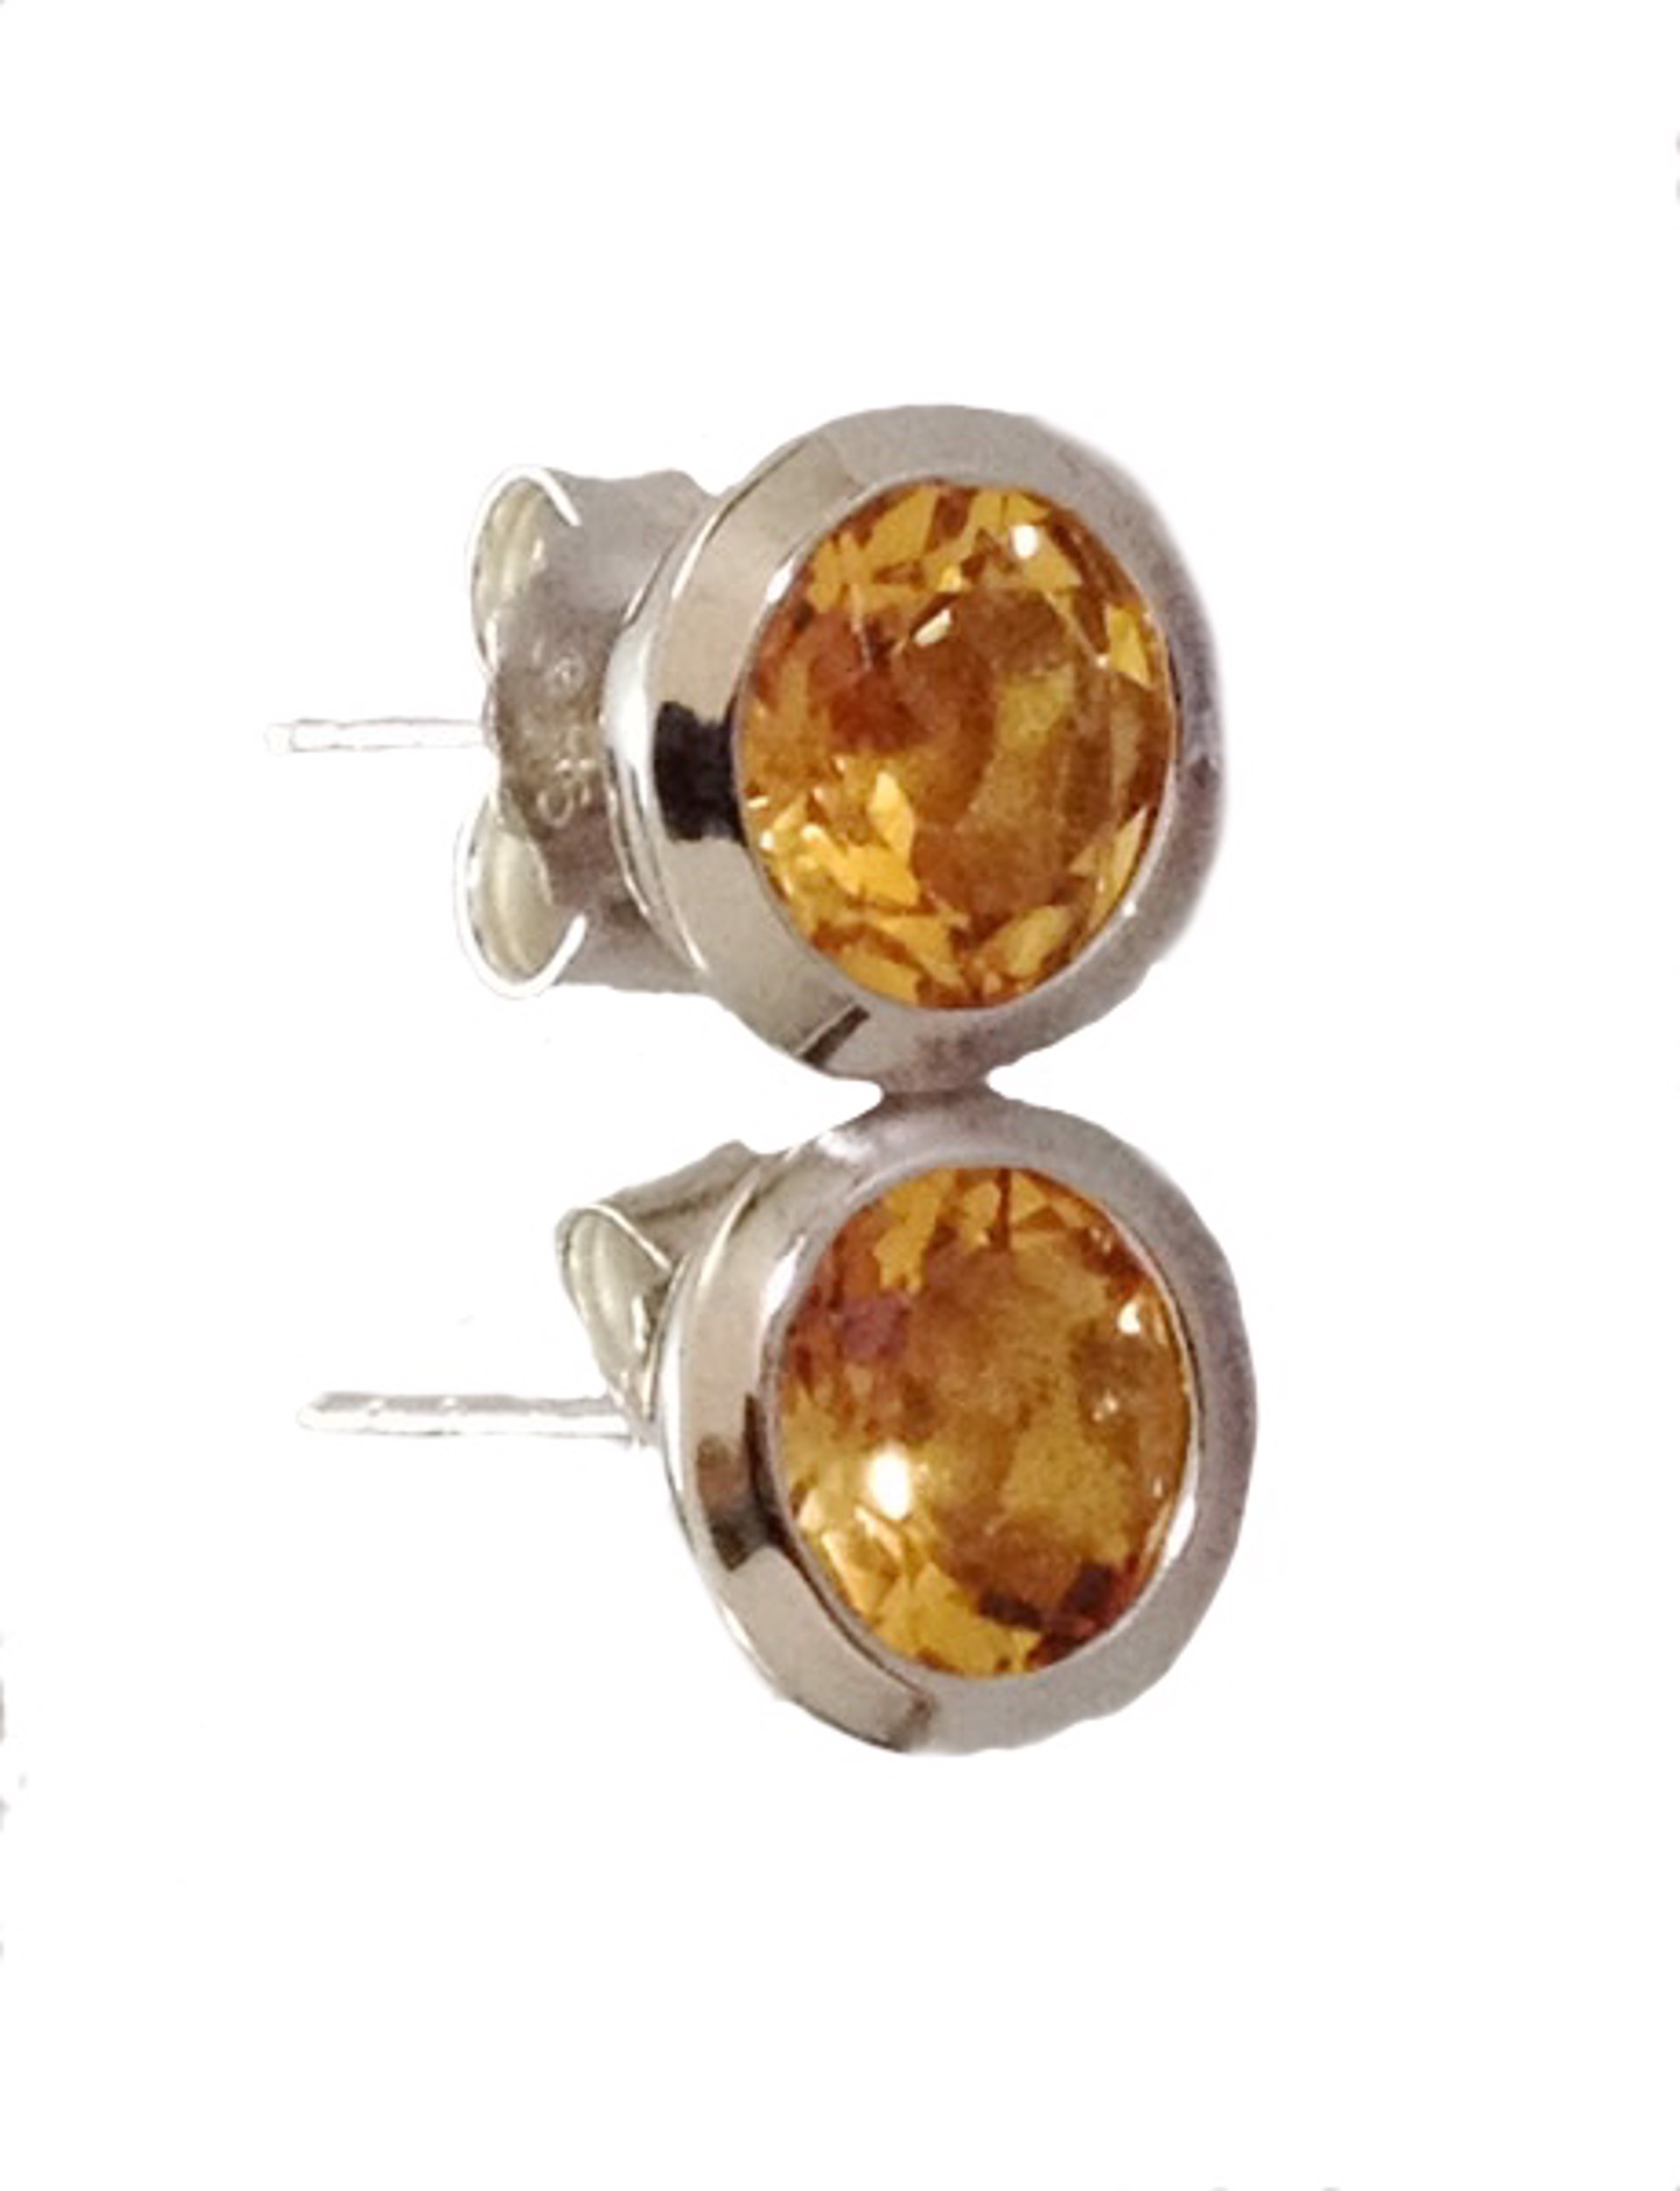 Earrings - Sterling Silver & Citrine E3136CT by Joryel Vera